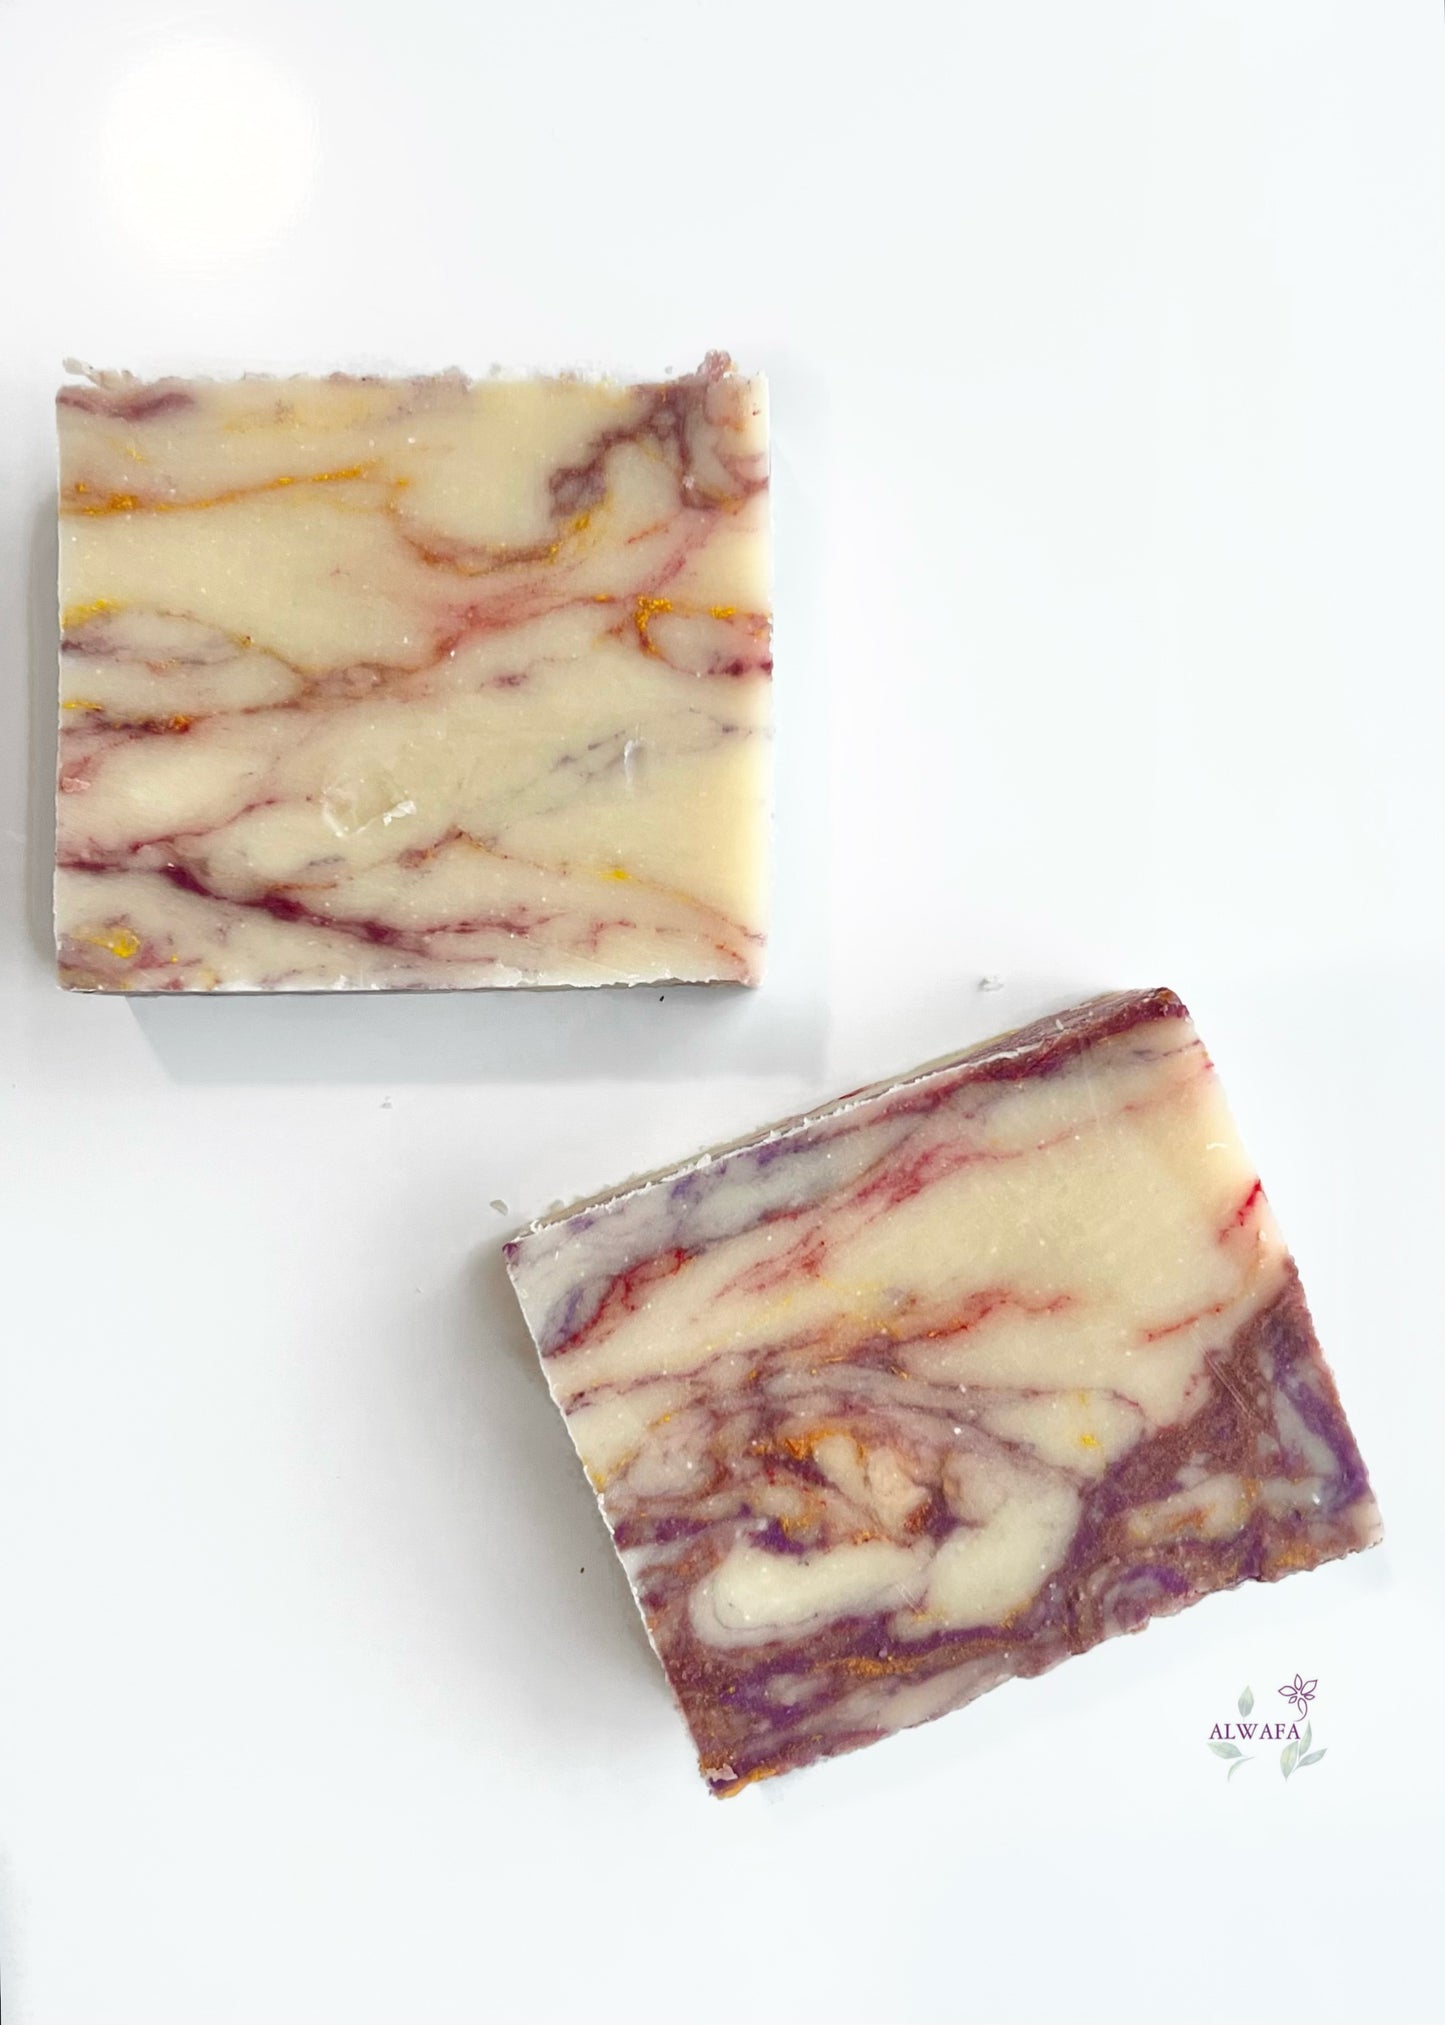 Orchid soap